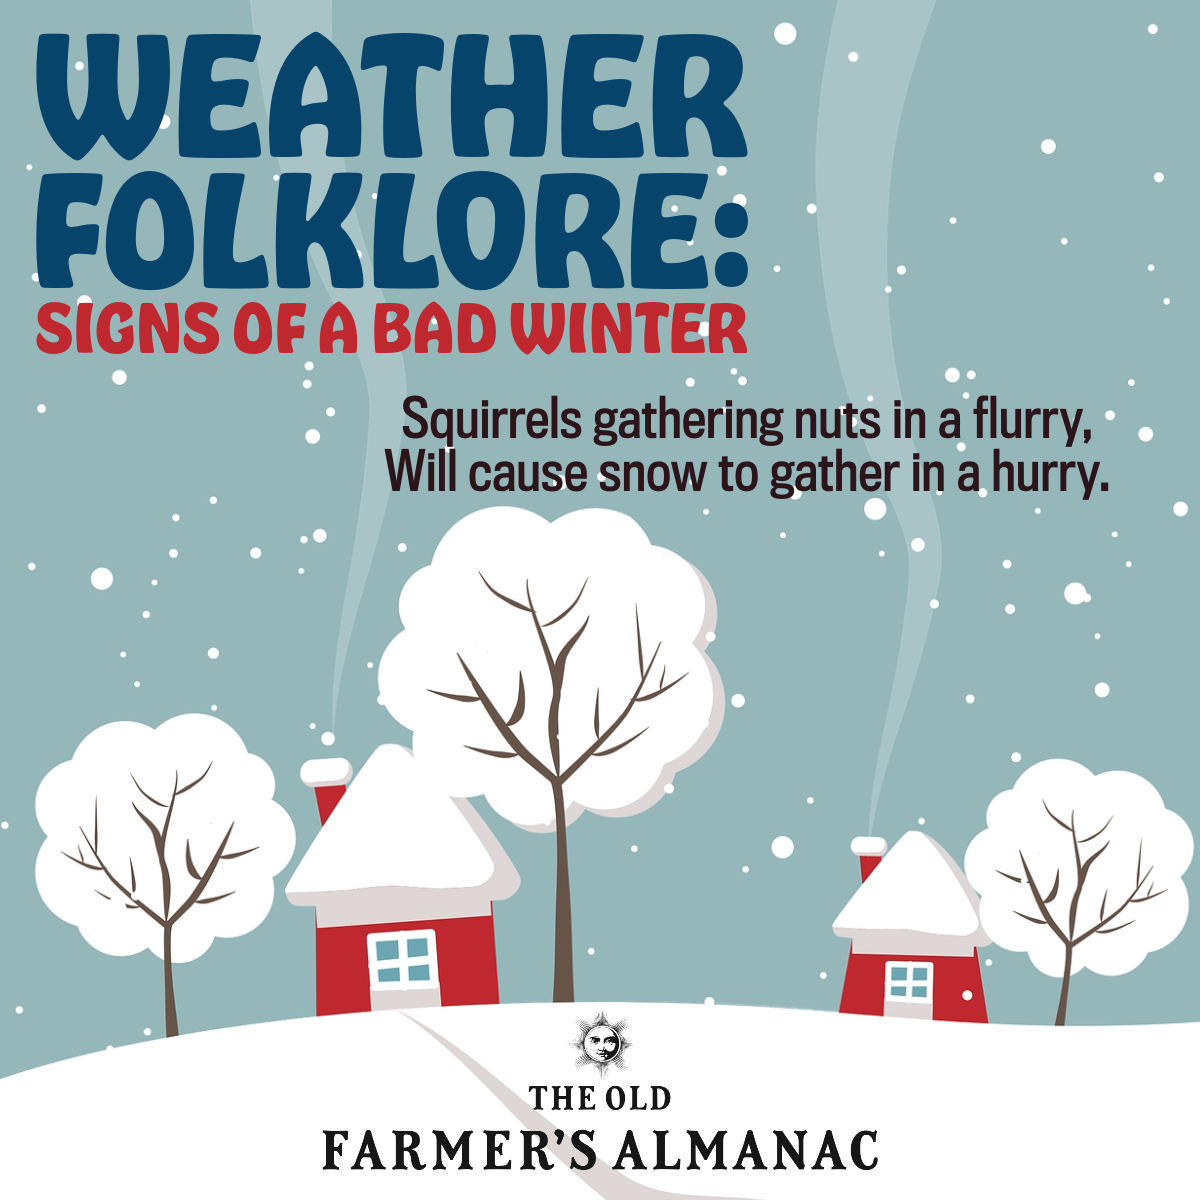 Squirrels gathering nuts in a flurry,  Will cause snow to gather in a hurry. weather folkore graphic with house in snow with snowy trees